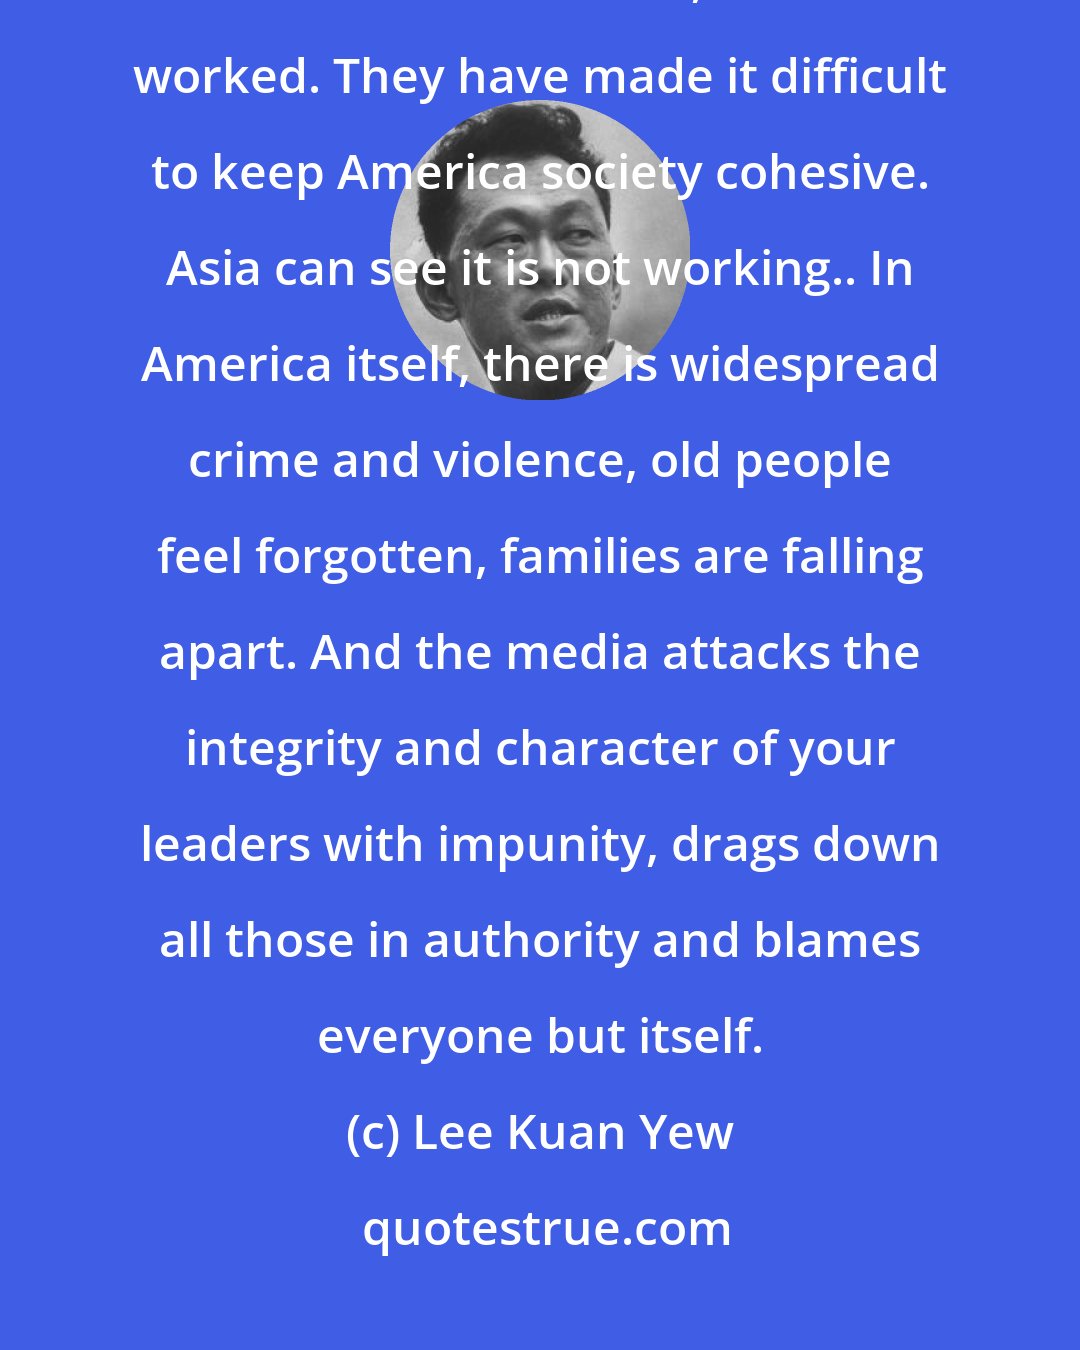 Lee Kuan Yew: The ideas of individual supremacy and the right of free expression, when carried to excess, have not worked. They have made it difficult to keep America society cohesive. Asia can see it is not working.. In America itself, there is widespread crime and violence, old people feel forgotten, families are falling apart. And the media attacks the integrity and character of your leaders with impunity, drags down all those in authority and blames everyone but itself.